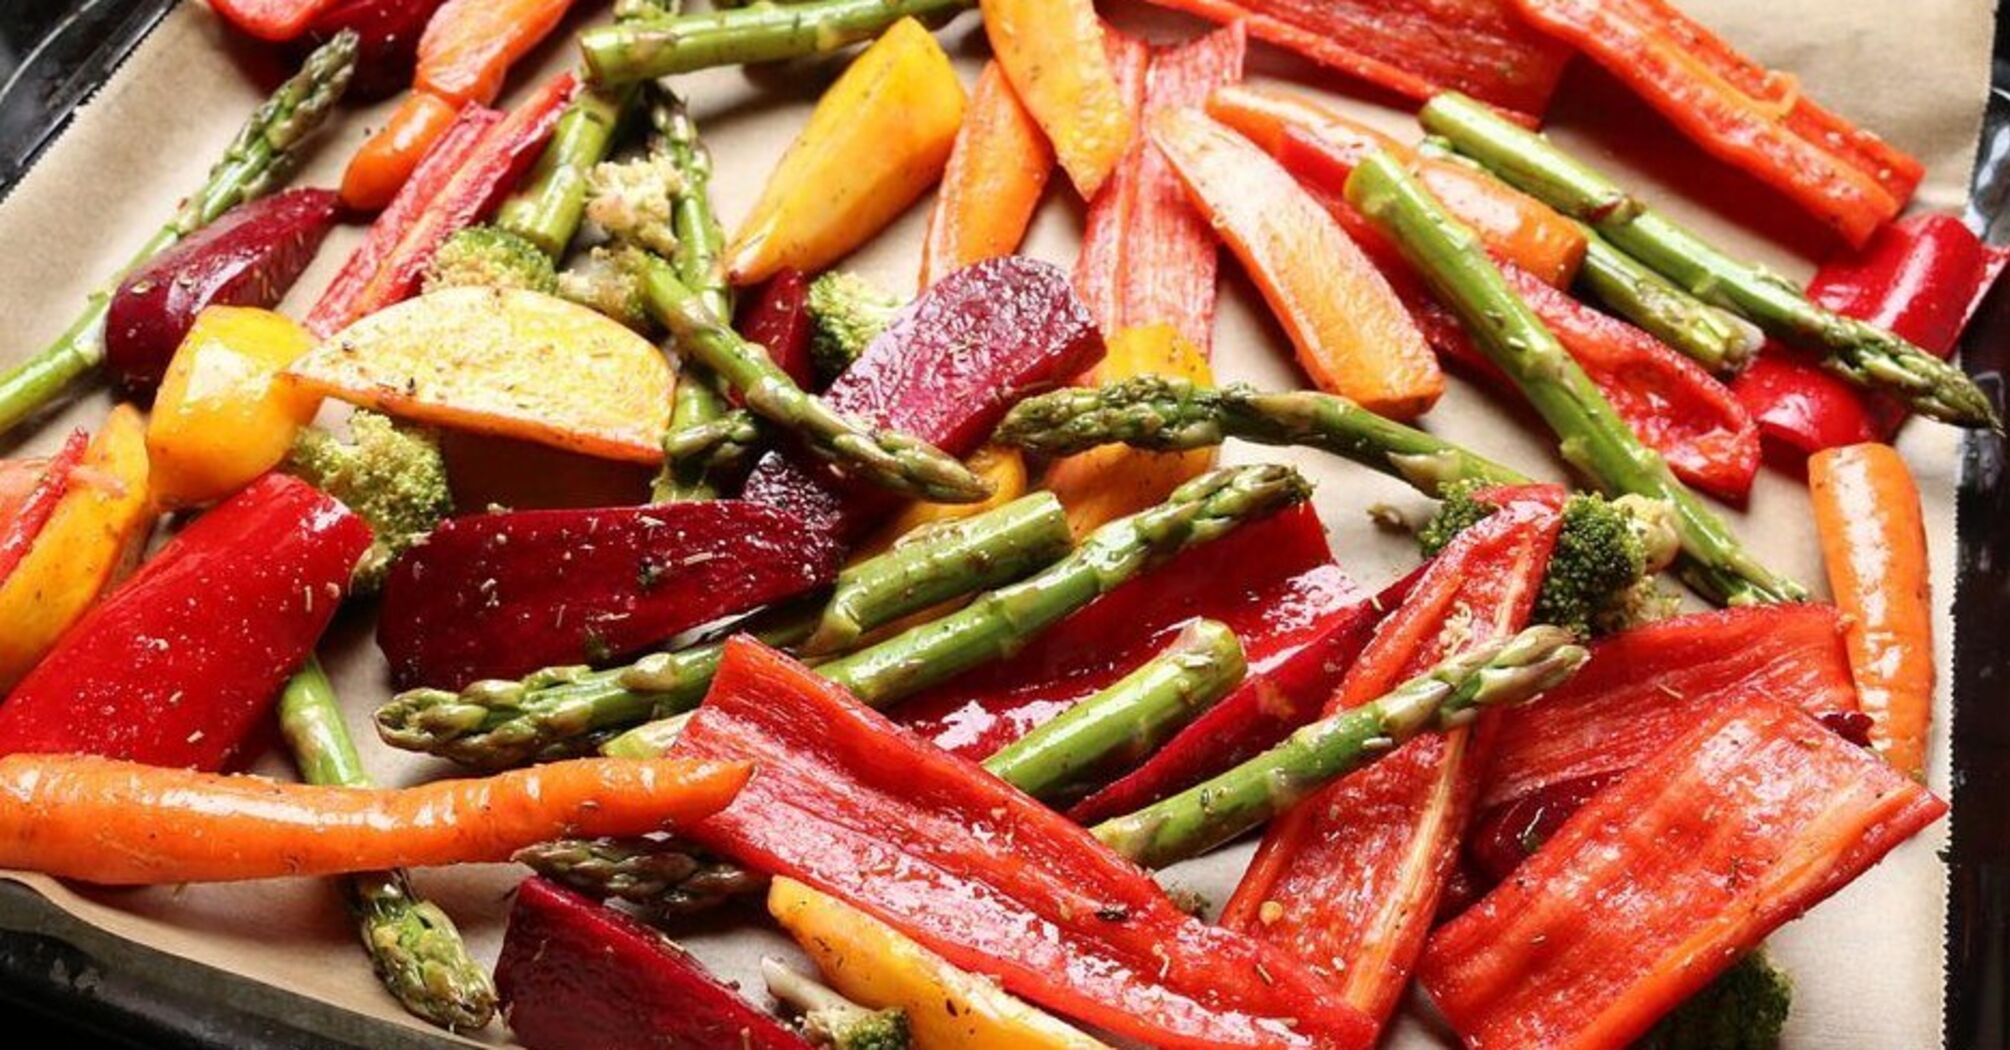 Baked vegetable salad: which ingredient will make the dish special